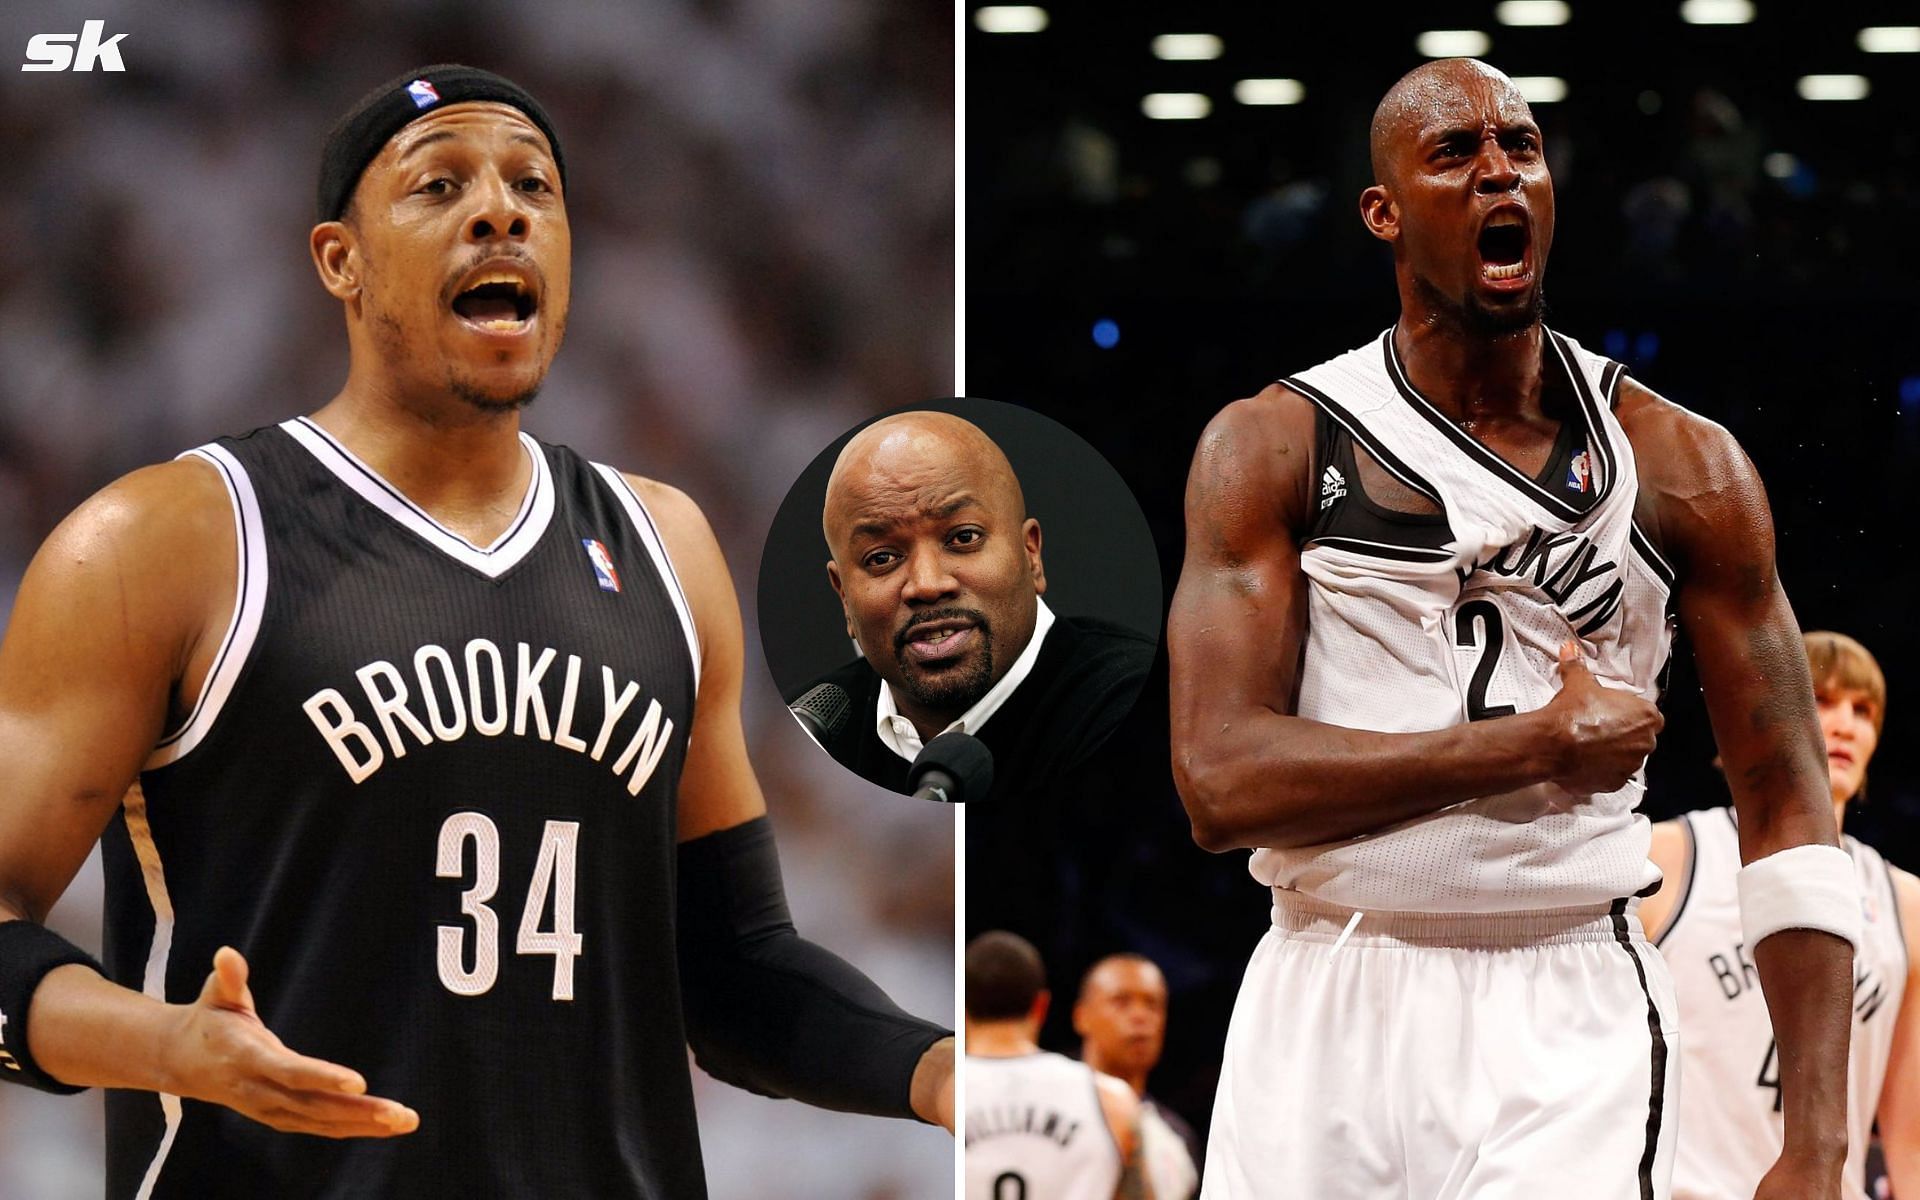 Former Sixers and Nets GM Billy King on his worst trade ever involving Kevin Garnett and Paul Pierce